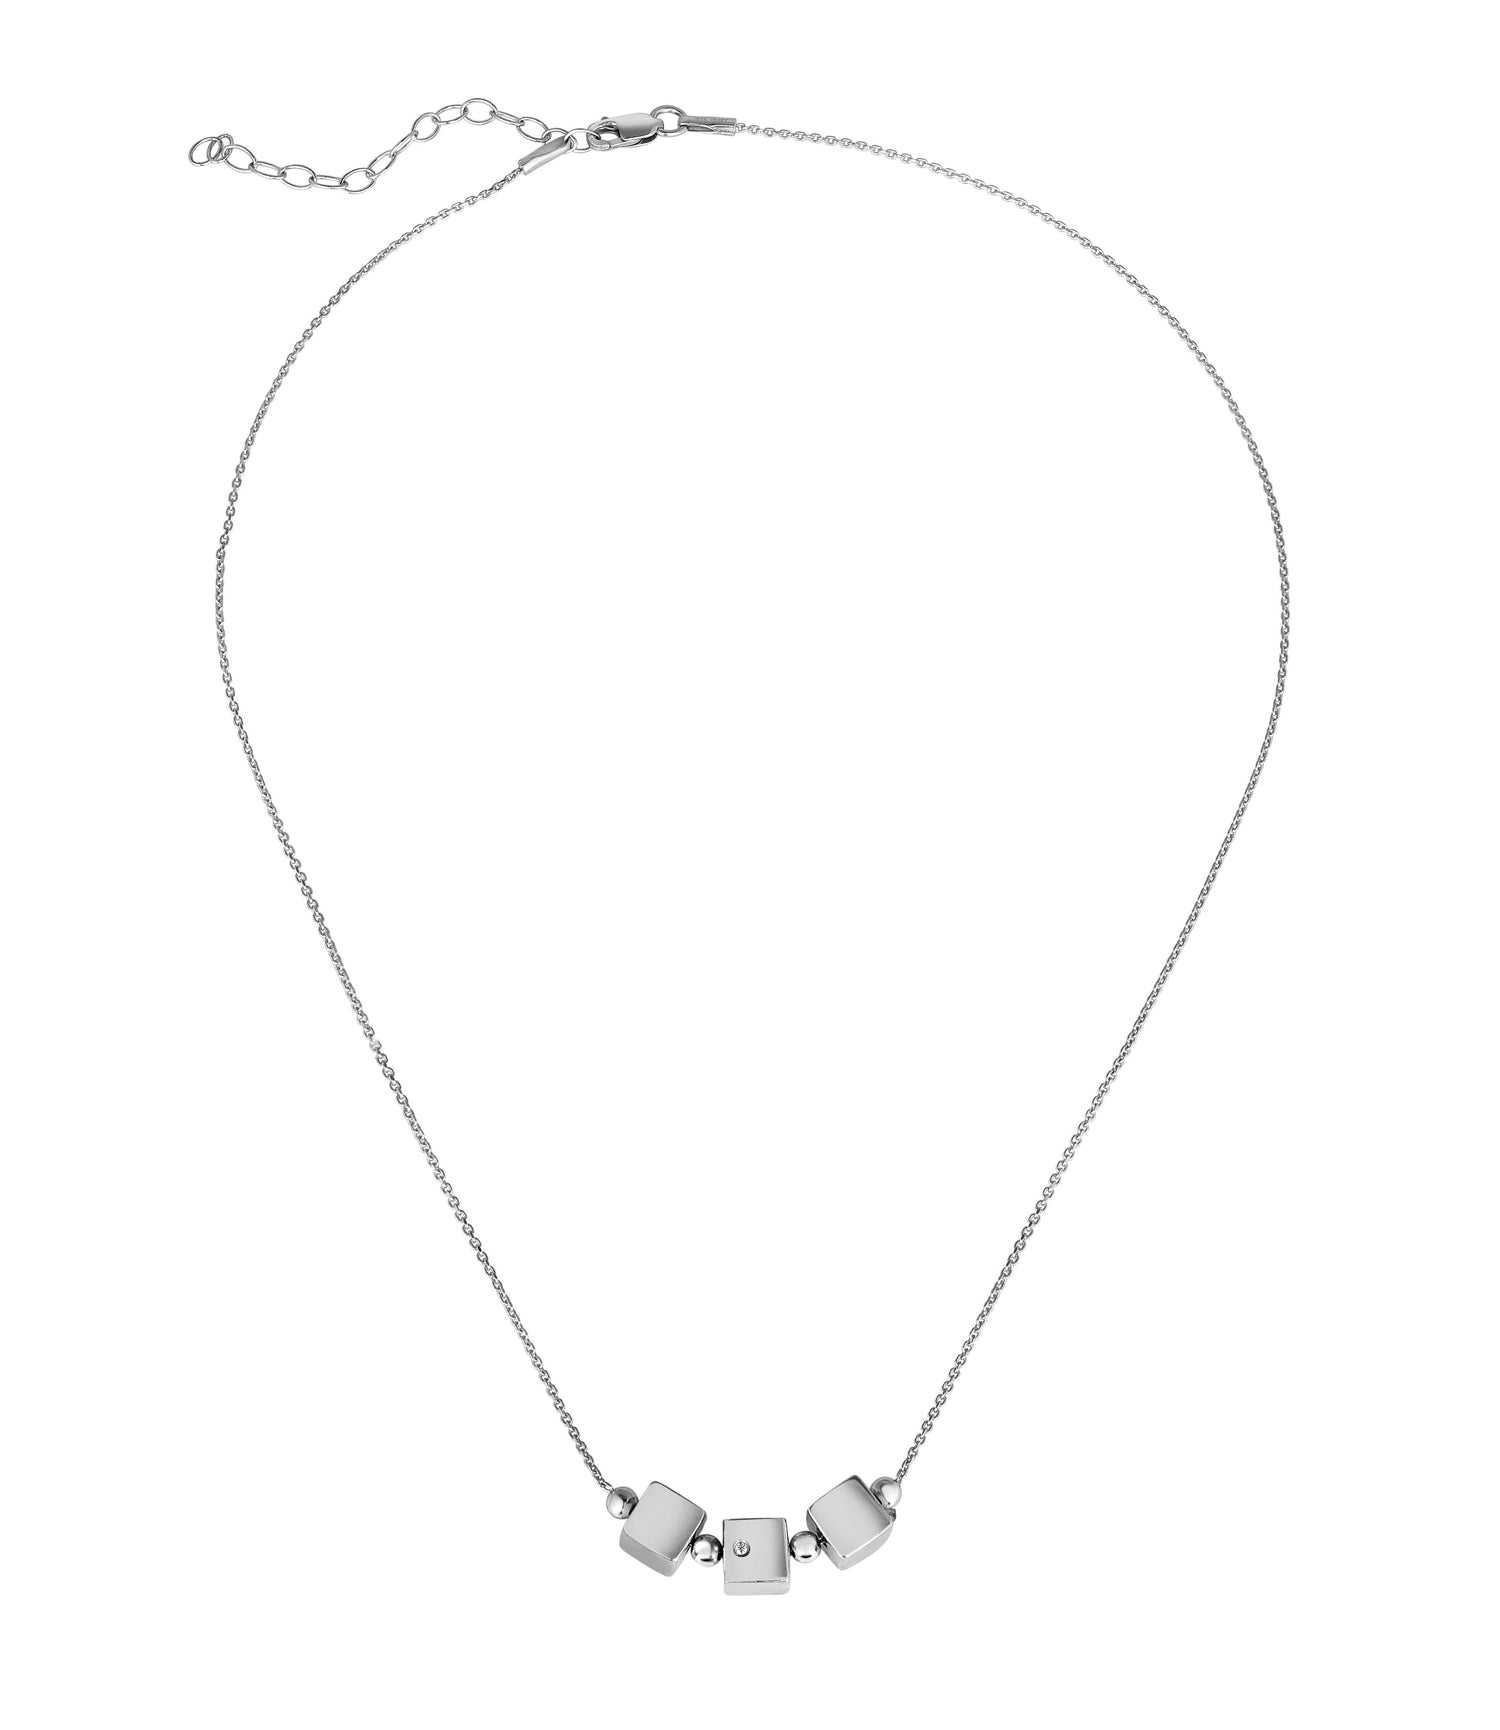 Sterling Silver Expandable Necklace with Cubes, Beads and Cubic Zirconia, 16